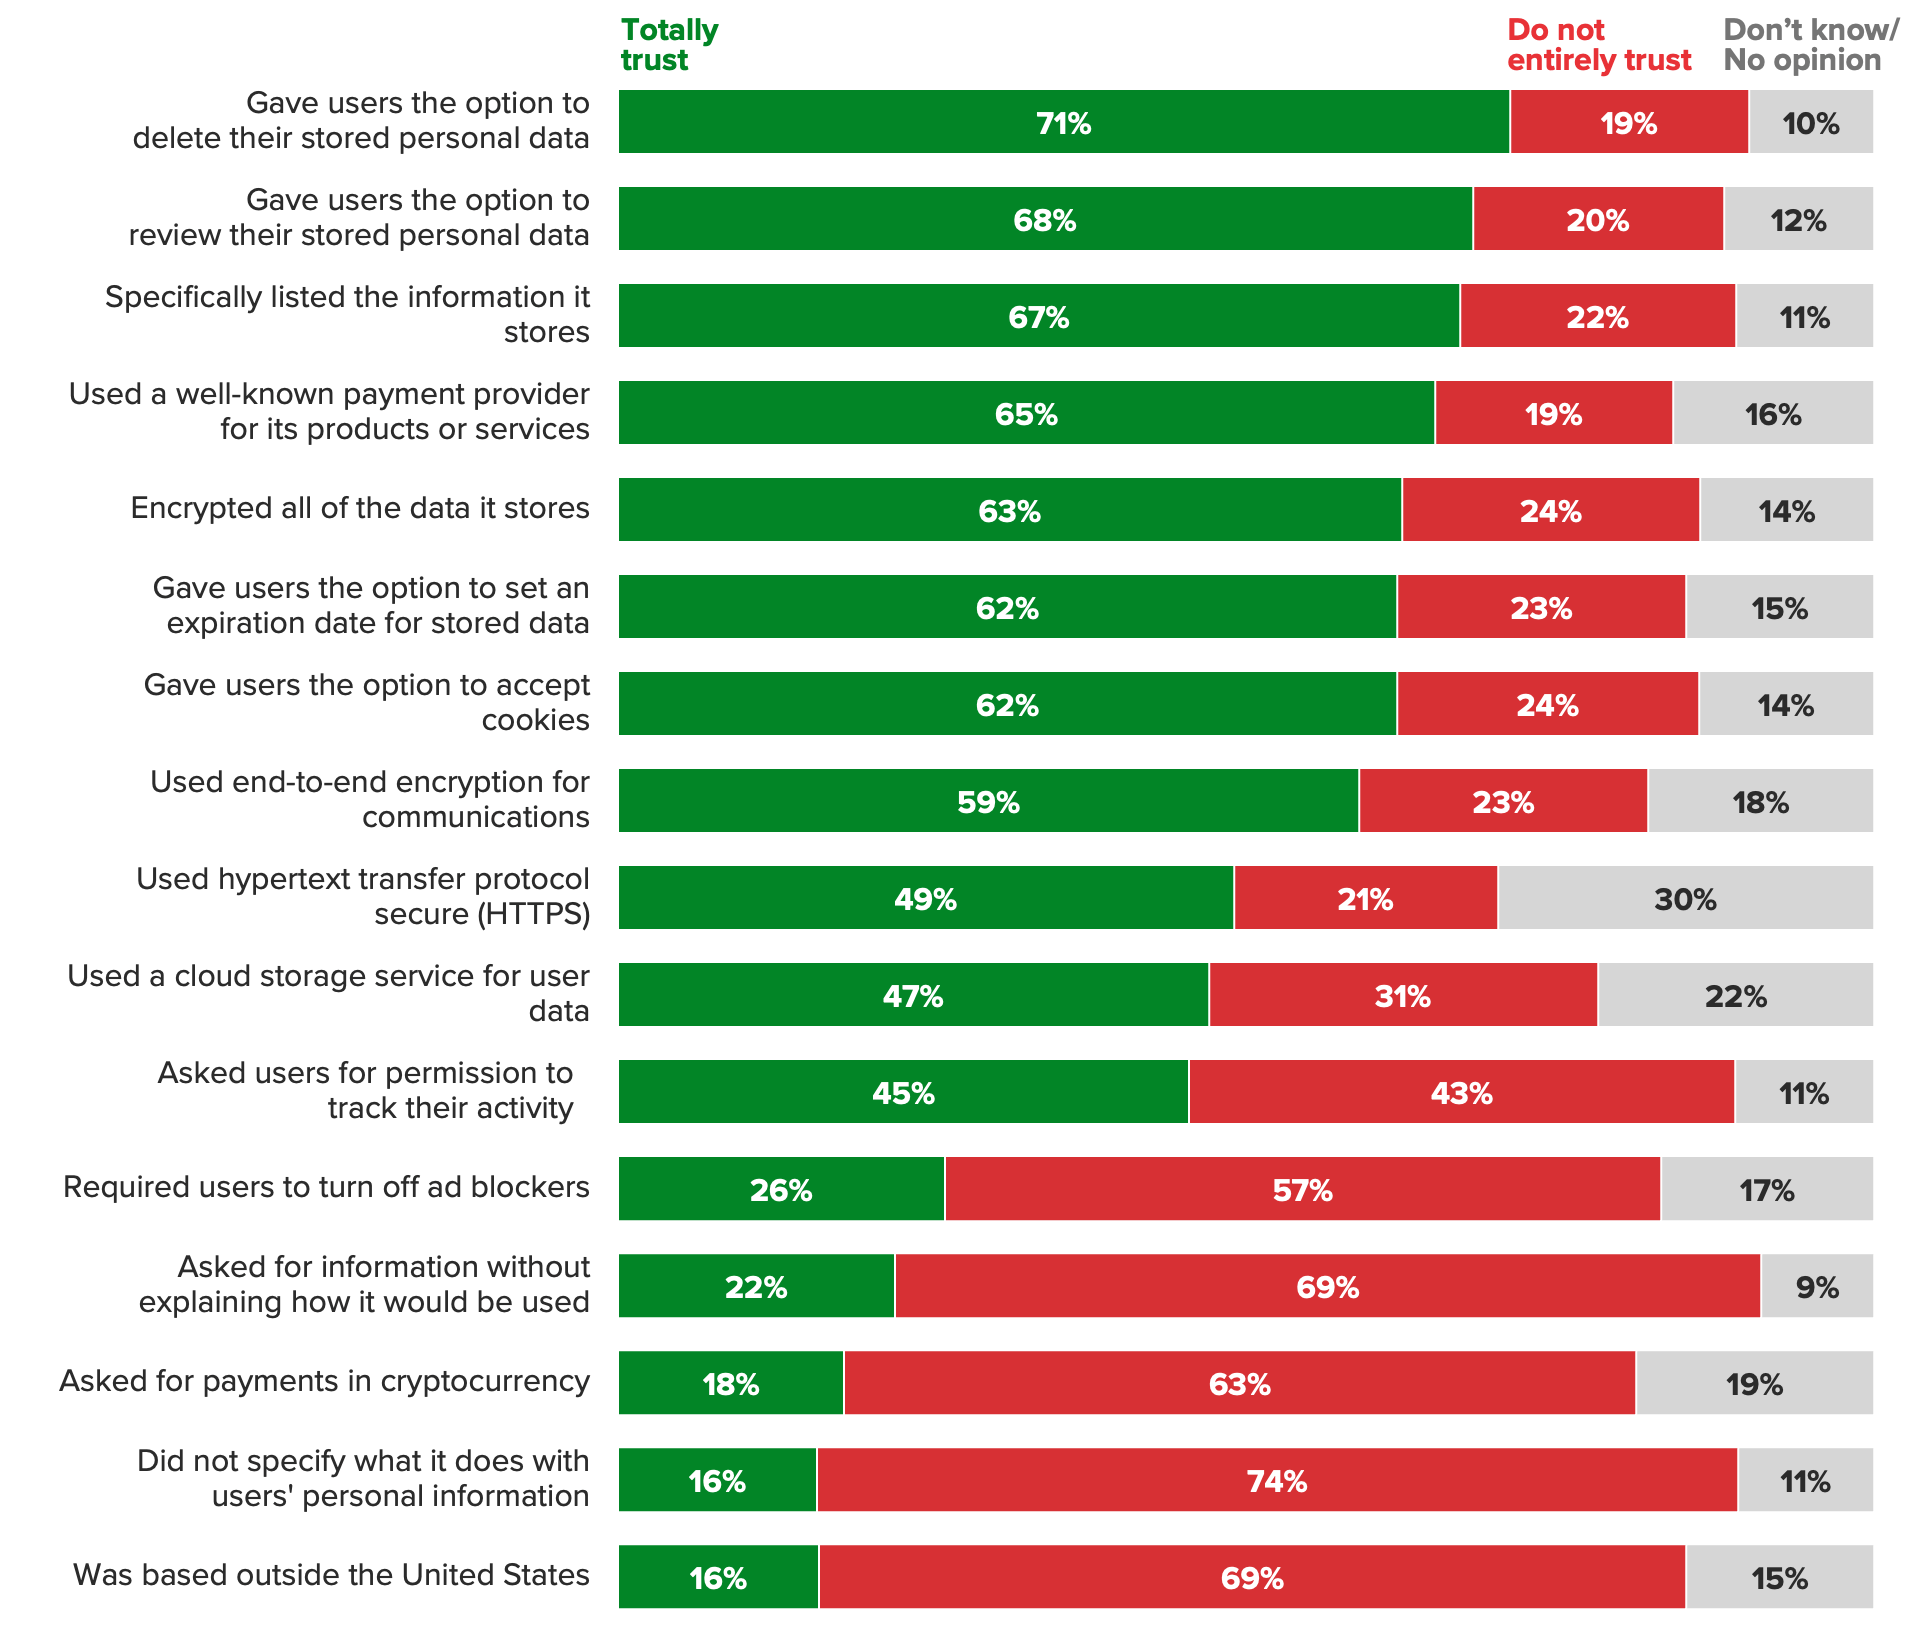 hBar chart of the total trust respondents have in apps and websites they were using for the first time to safely and responsibly handle their private data, showing 7 in 10 adults would have trust if they gave users the option to delete personal data they store.